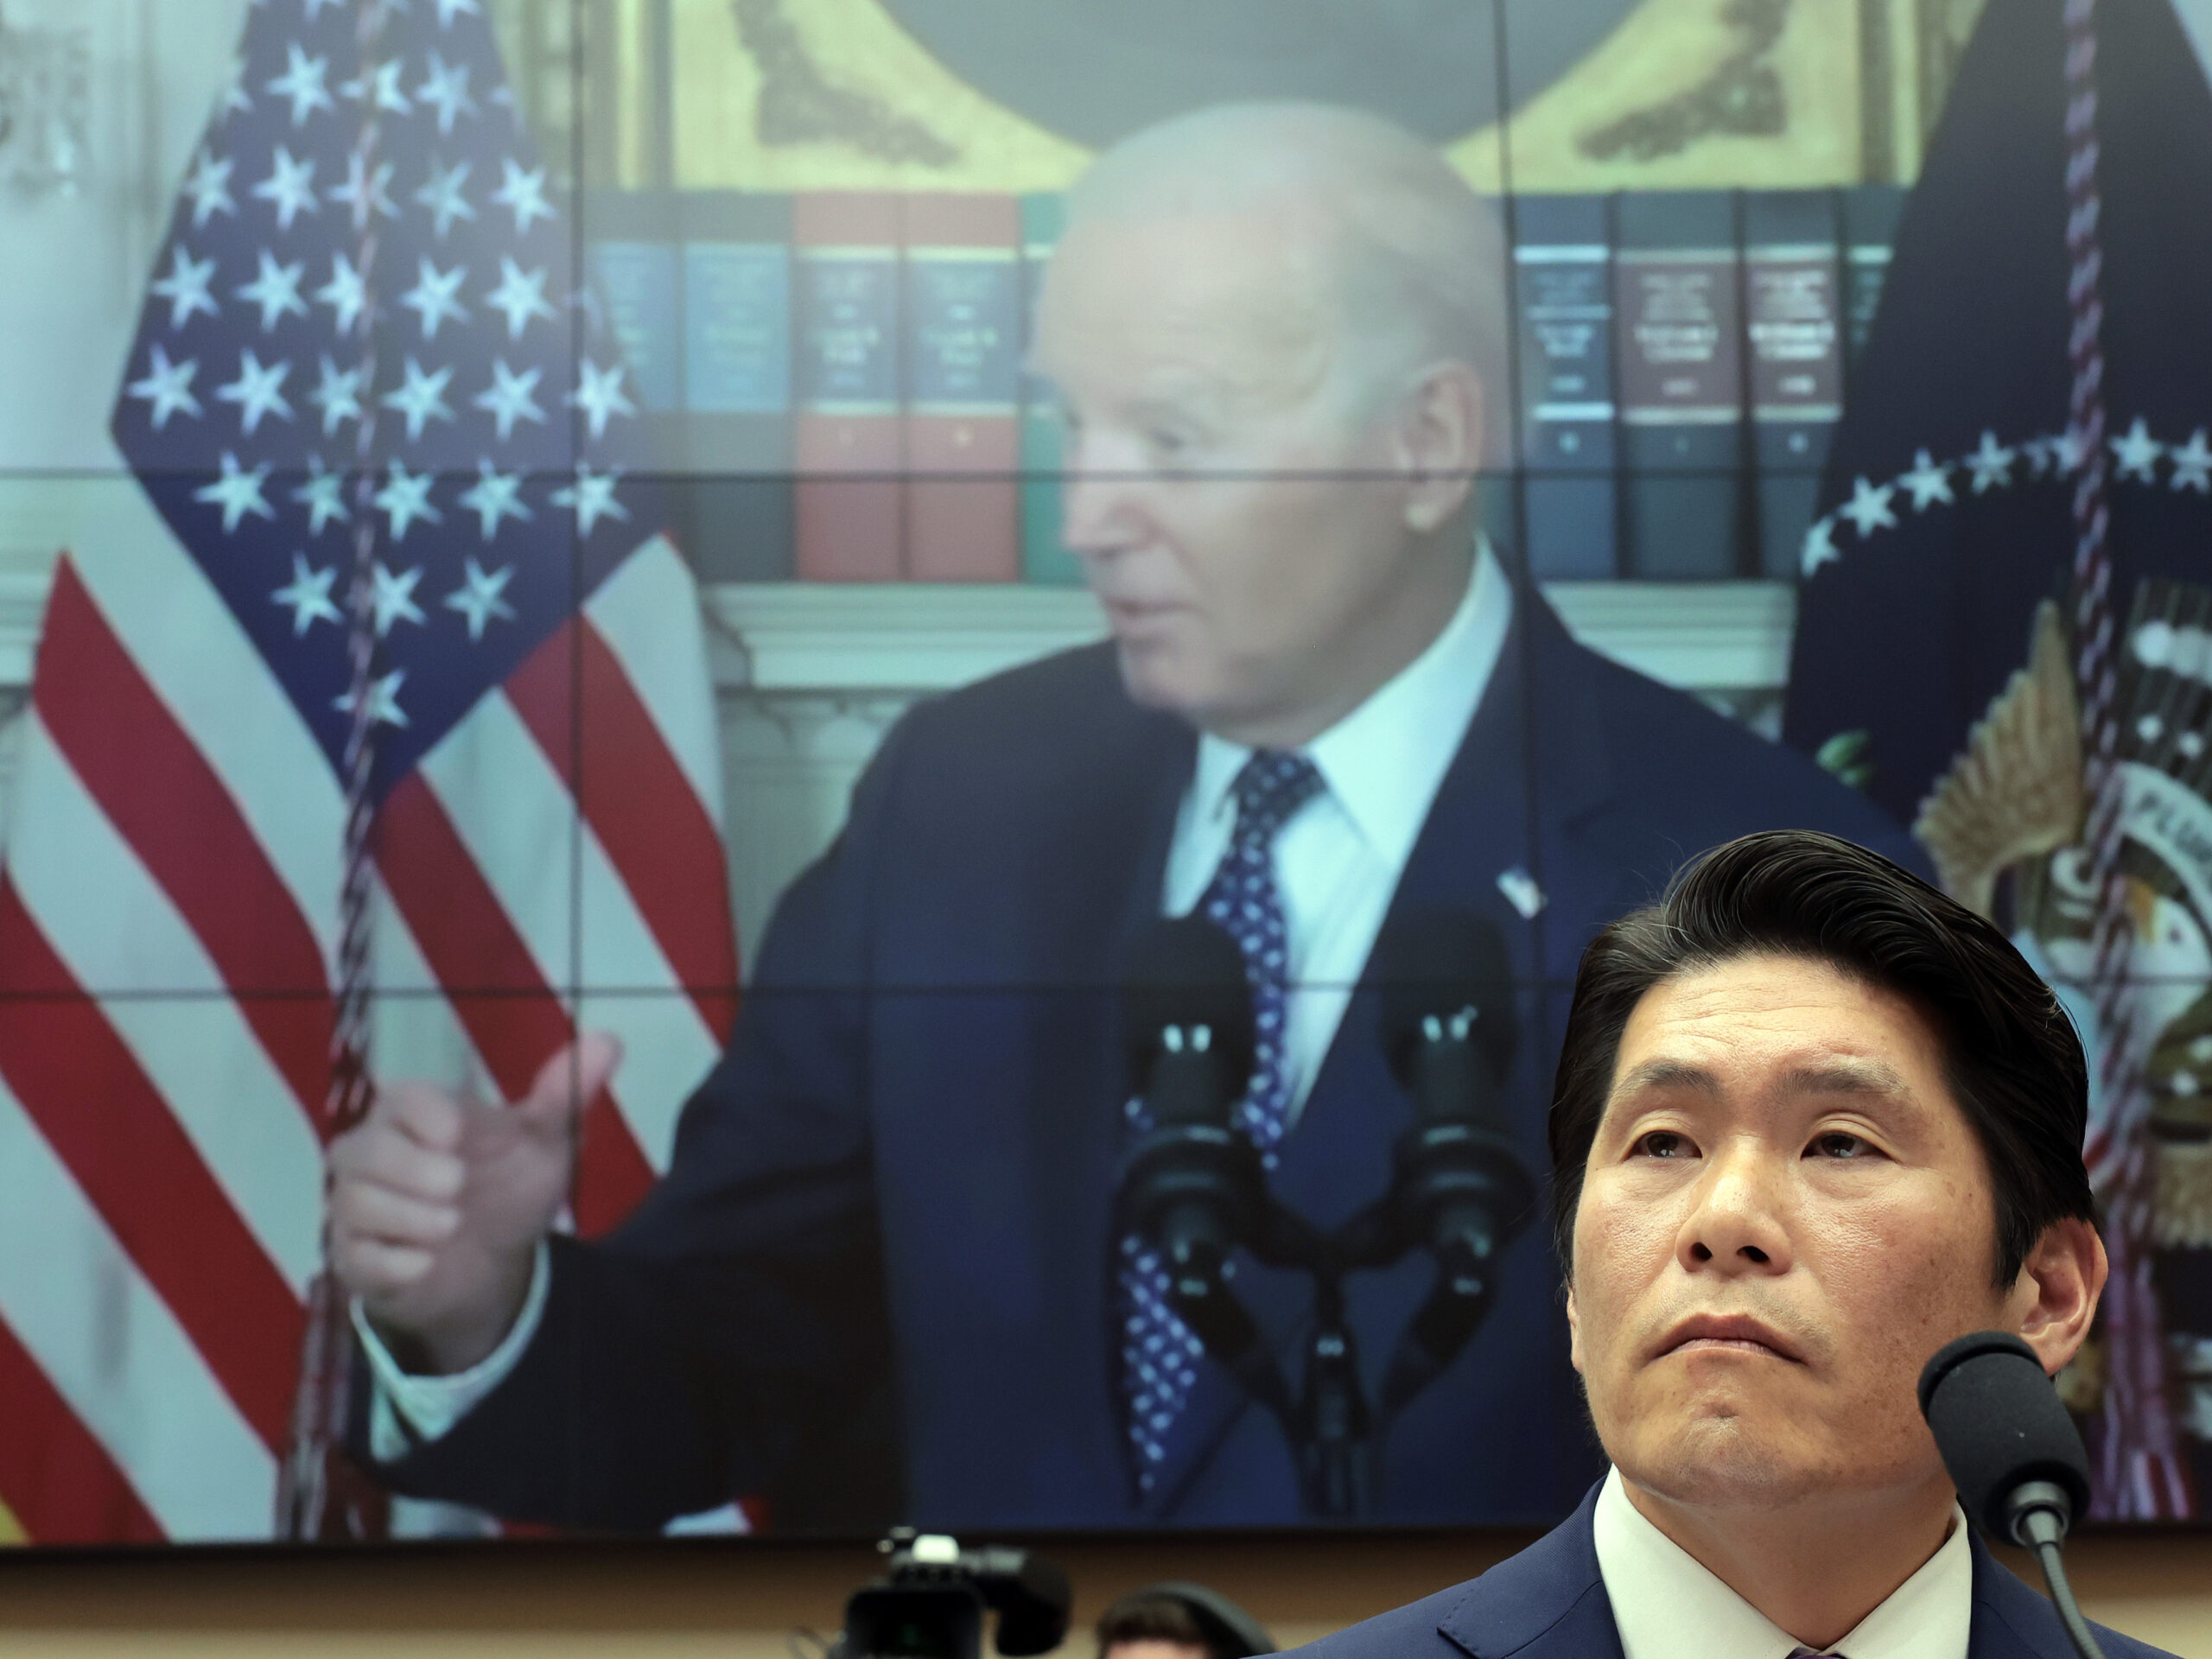 Special counsel Hur defended Biden classified documents probe before Congress